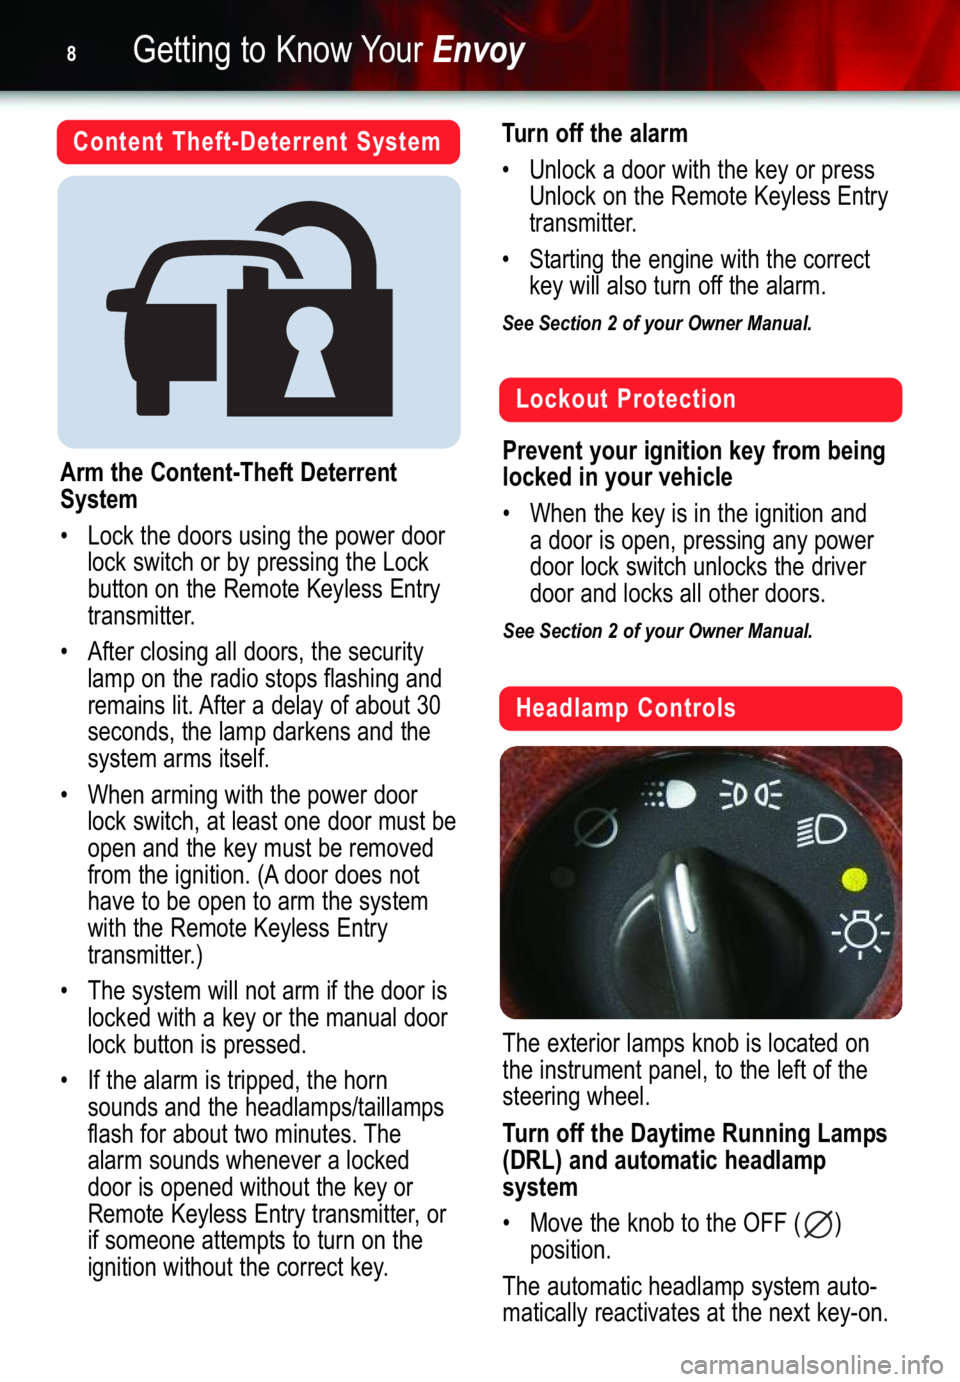 GMC ENVOY 2006  Get To Know Guide Getting to Know YourEnvoy8
Content Theft�Deterrent System
Arm the Content�Theft Deterrent
System
• Lock the doors using the power door
lock switch or by pressing the Lock
button on the Remote Keyles